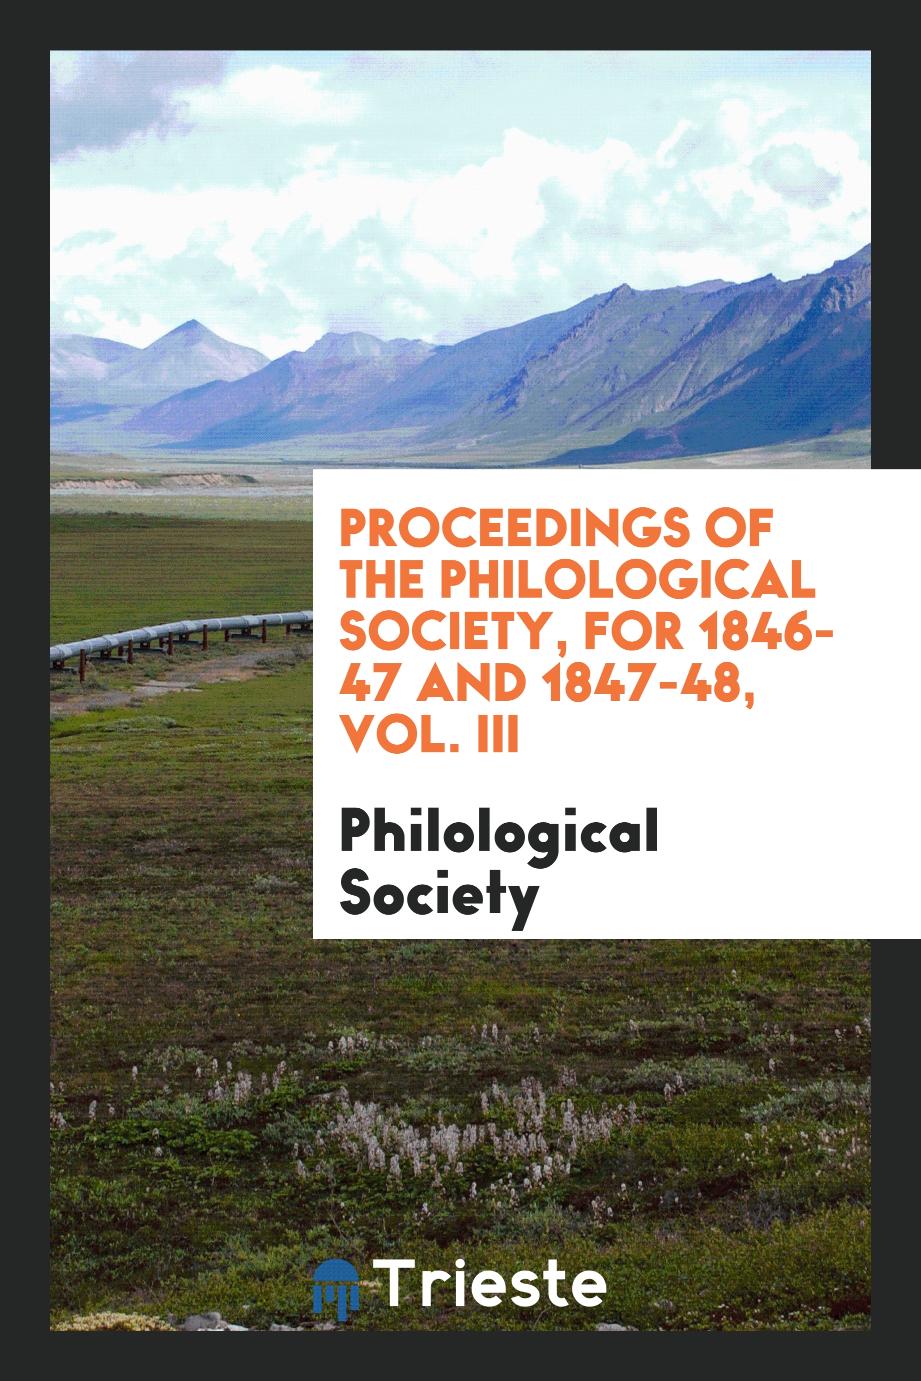 Proceedings of the Philological Society, for 1846-47 and 1847-48, Vol. III